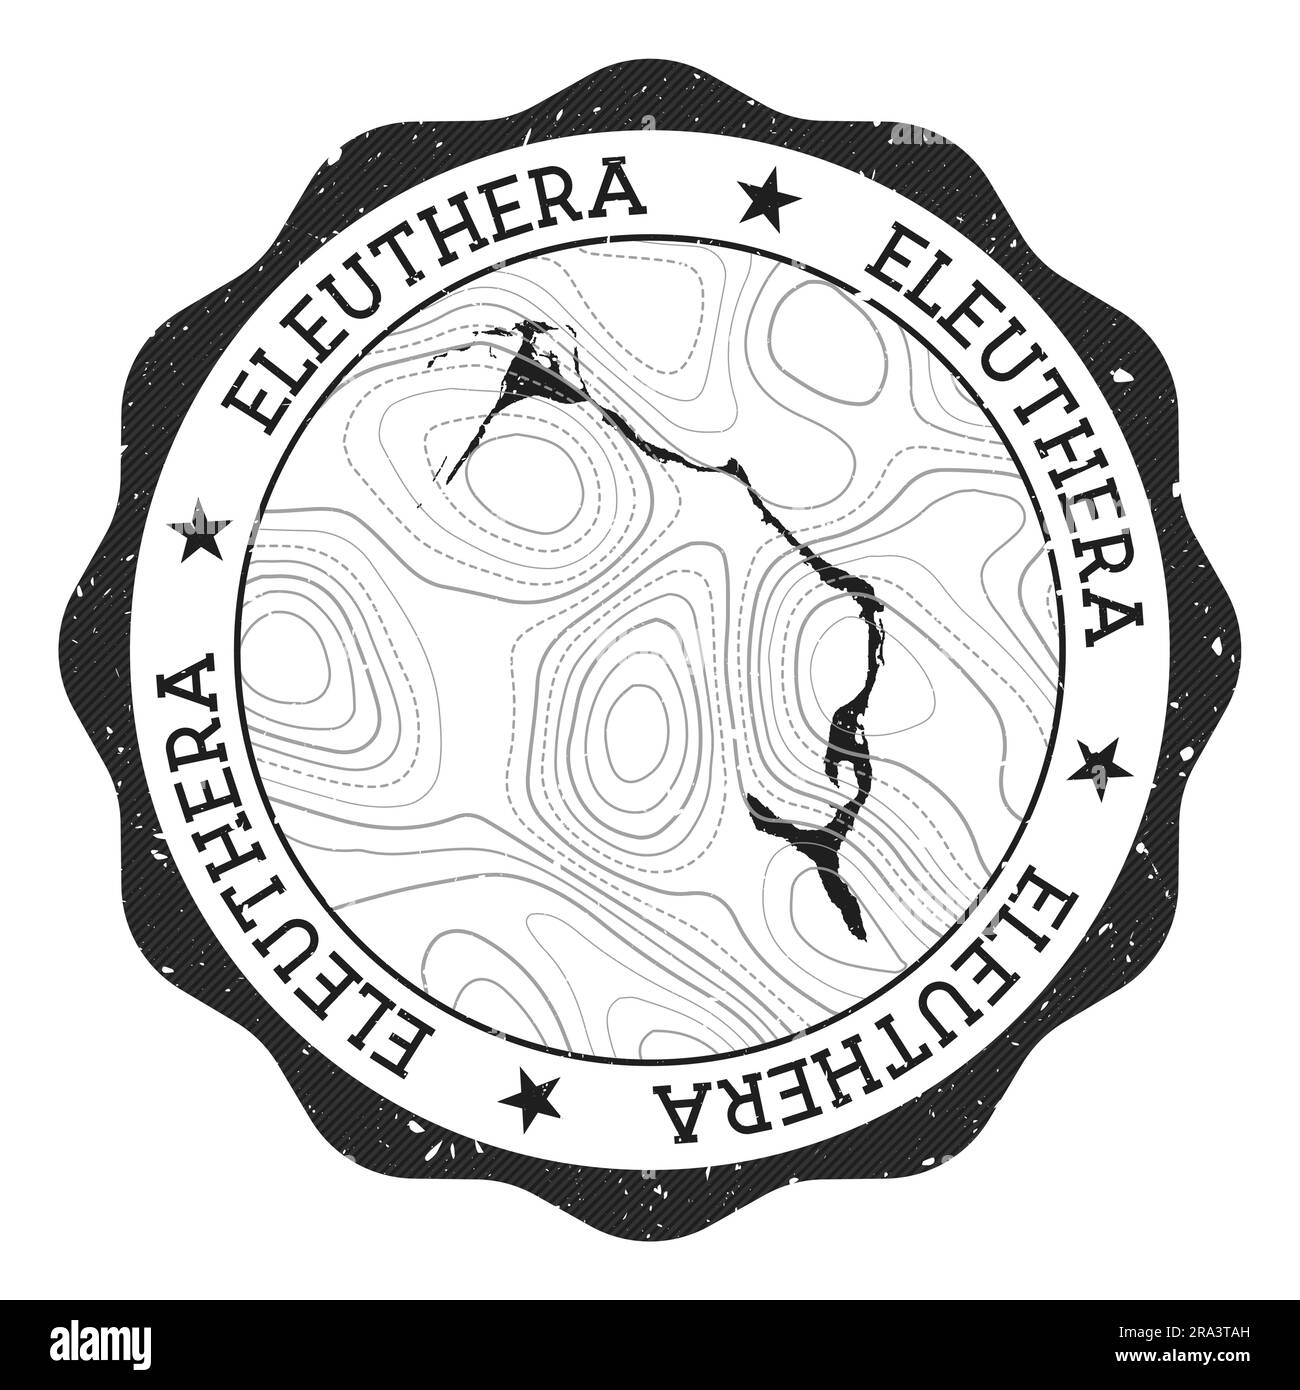 Eleuthera outdoor stamp. Round sticker with map of island with topographic isolines. Vector illustration. Can be used as insignia, logotype, label, st Stock Vector